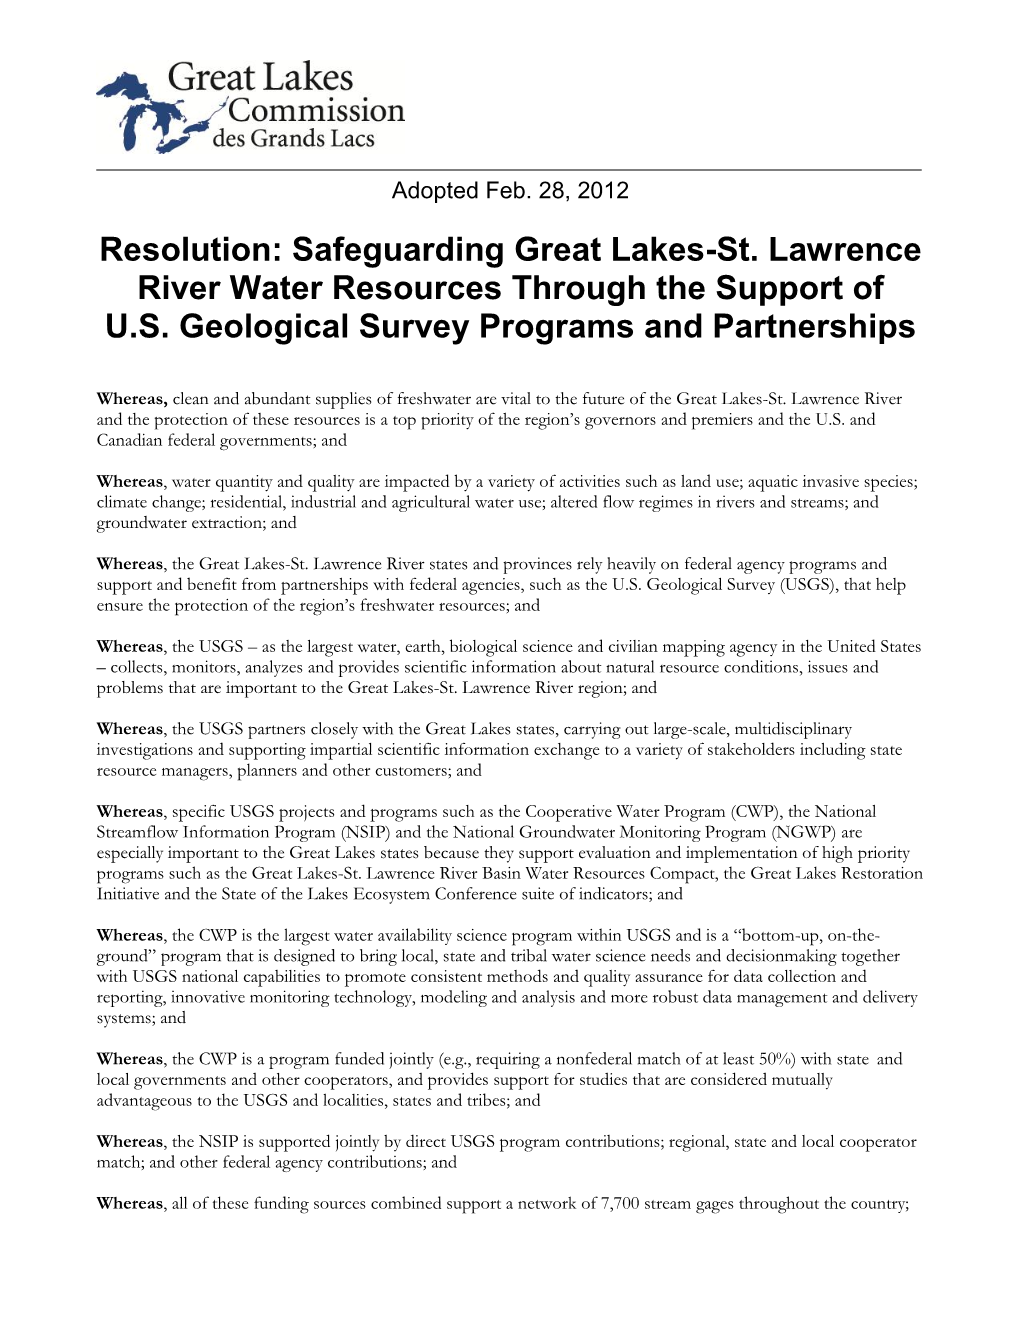 Safeguarding Great Lakes-St. Lawrence River Water Resources Through the Support of U.S